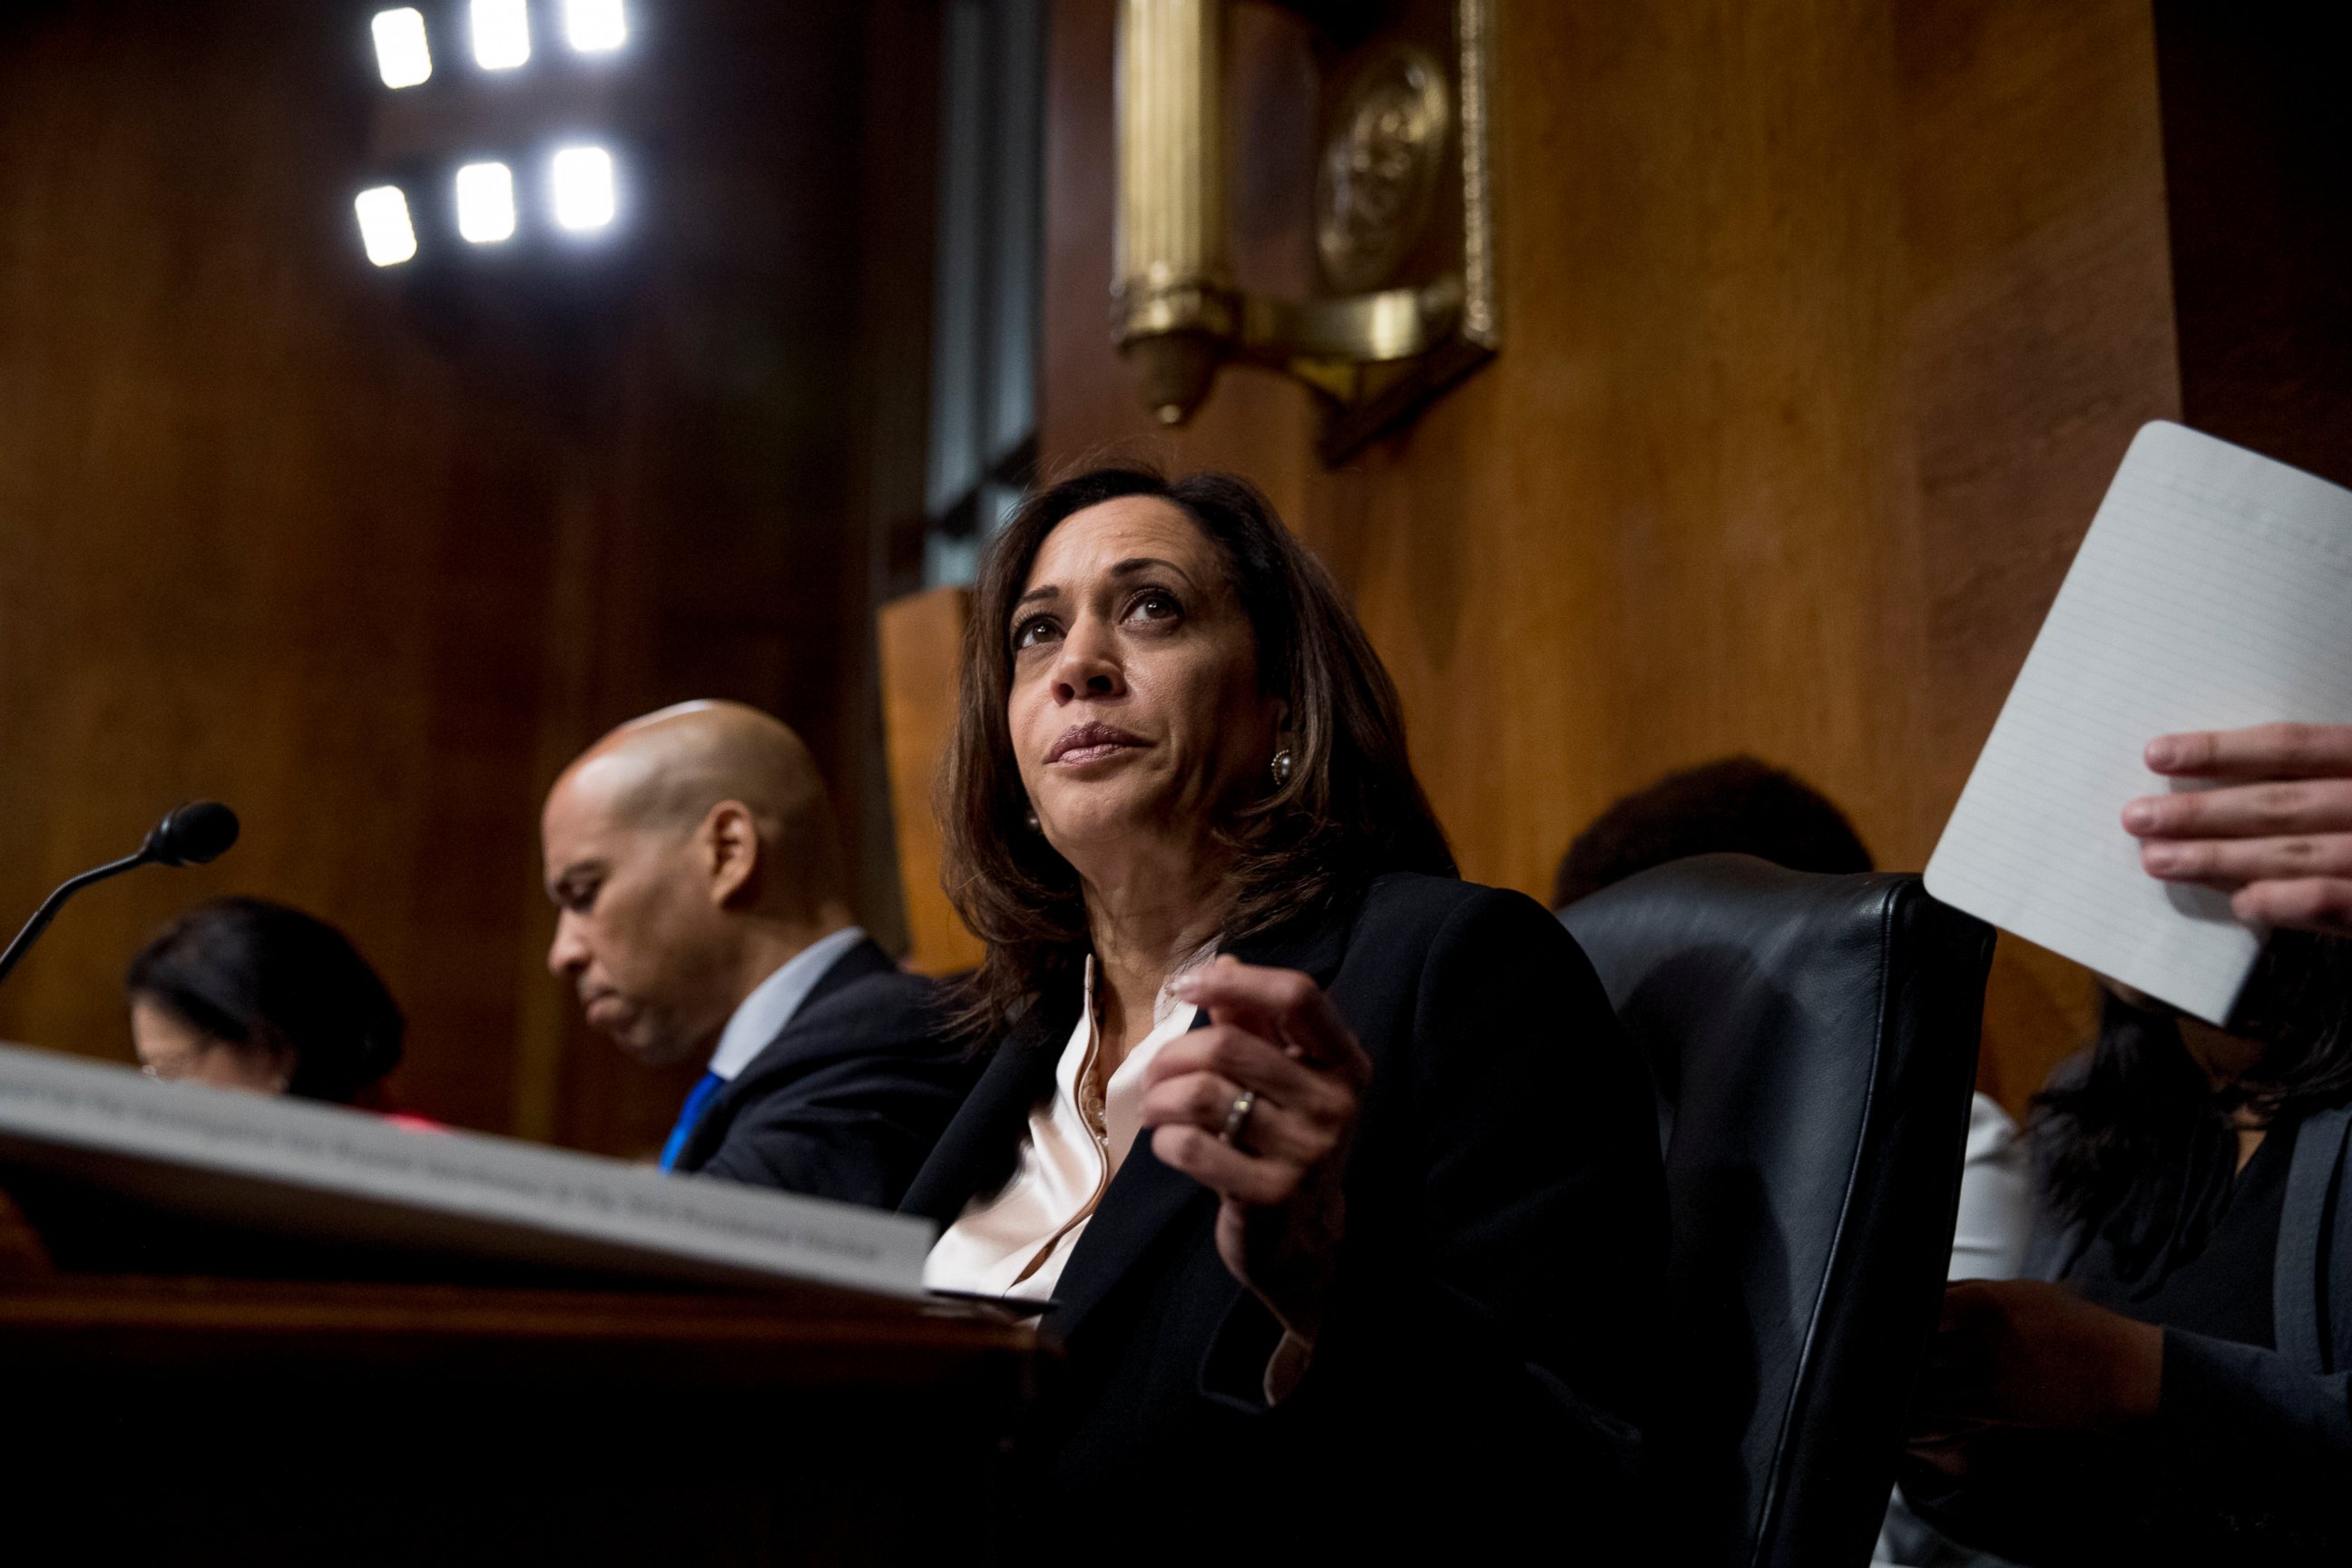 Democratic presidential candidate Sen. Kamala Harris, D-Calif., listens as Attorney General William Barr testifies during a Senate Judiciary Committee hearing on Capitol Hill in Washington, Wednesday, May 1, 2019.